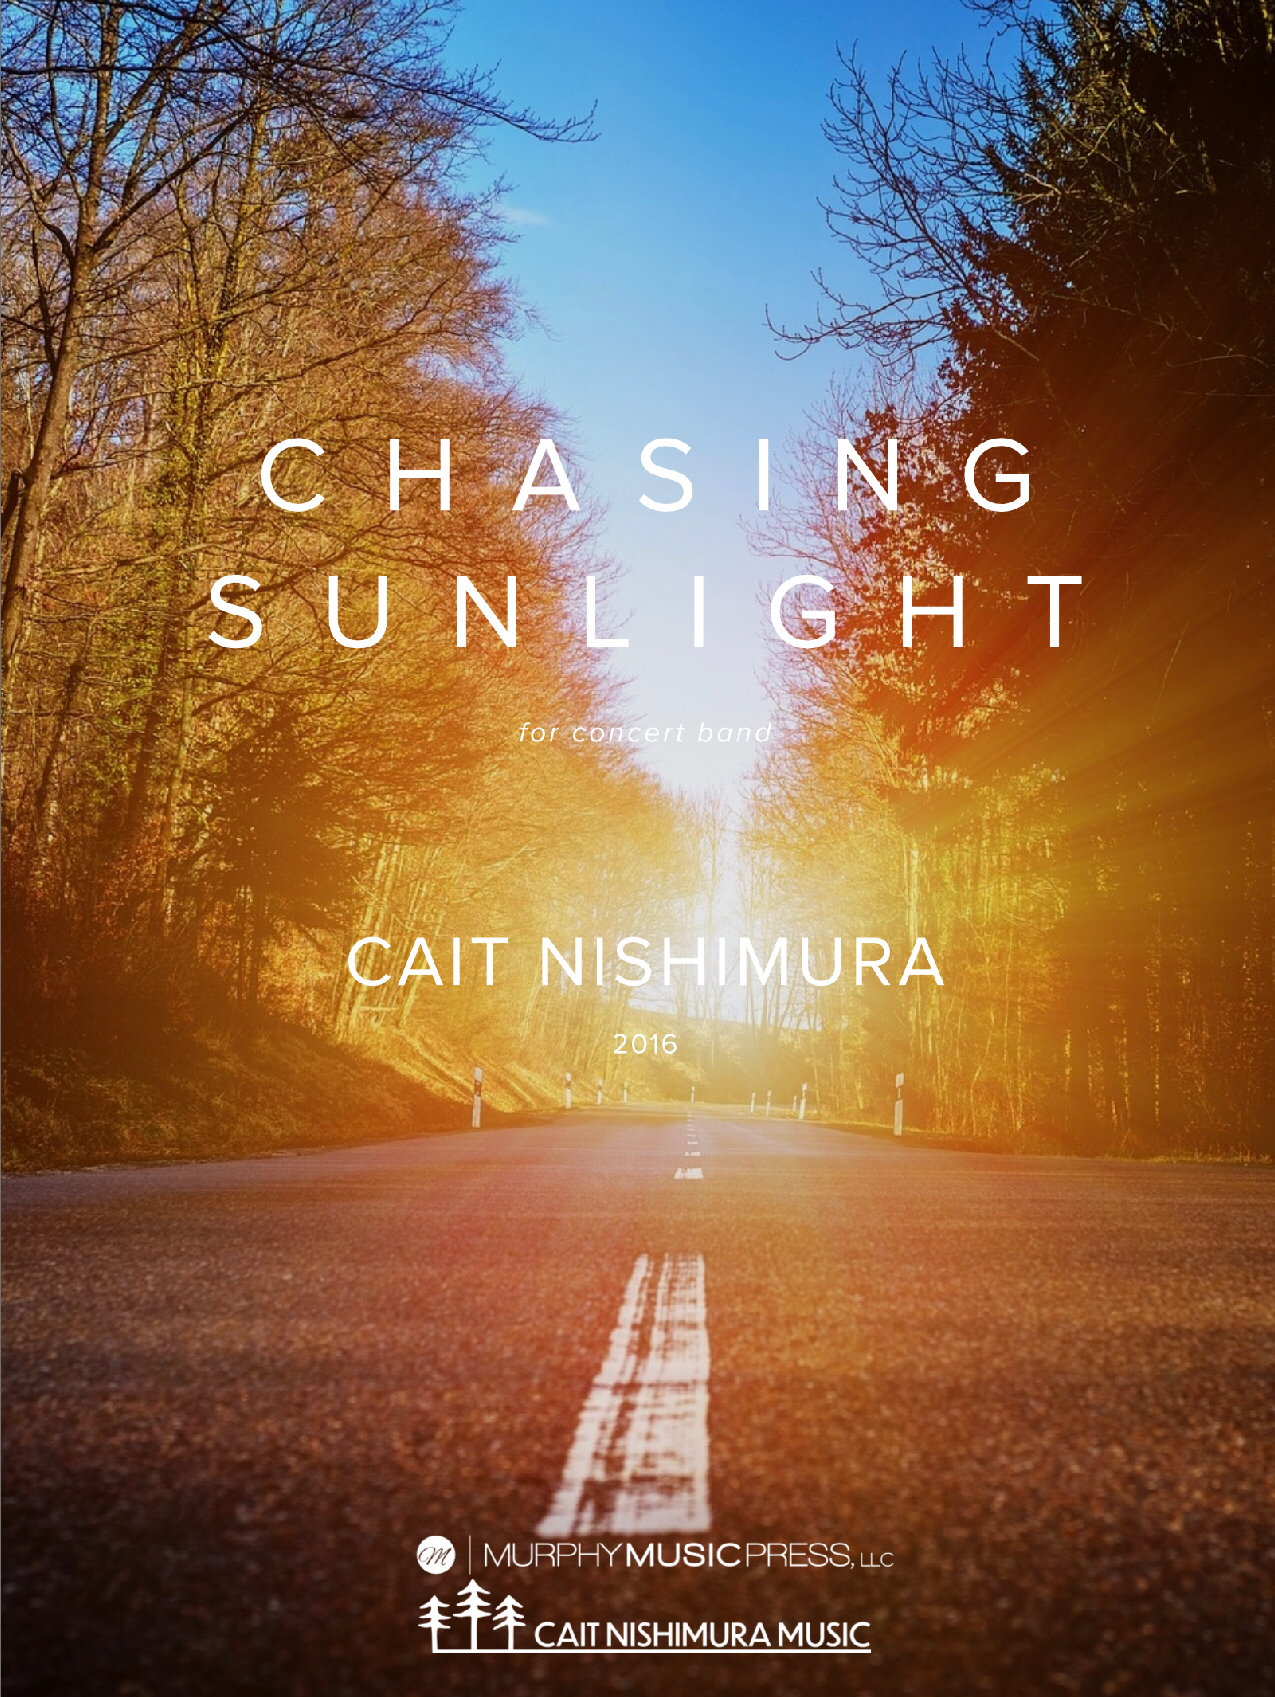 Chasing Sunlight (Score Only) by Cait Nishimura